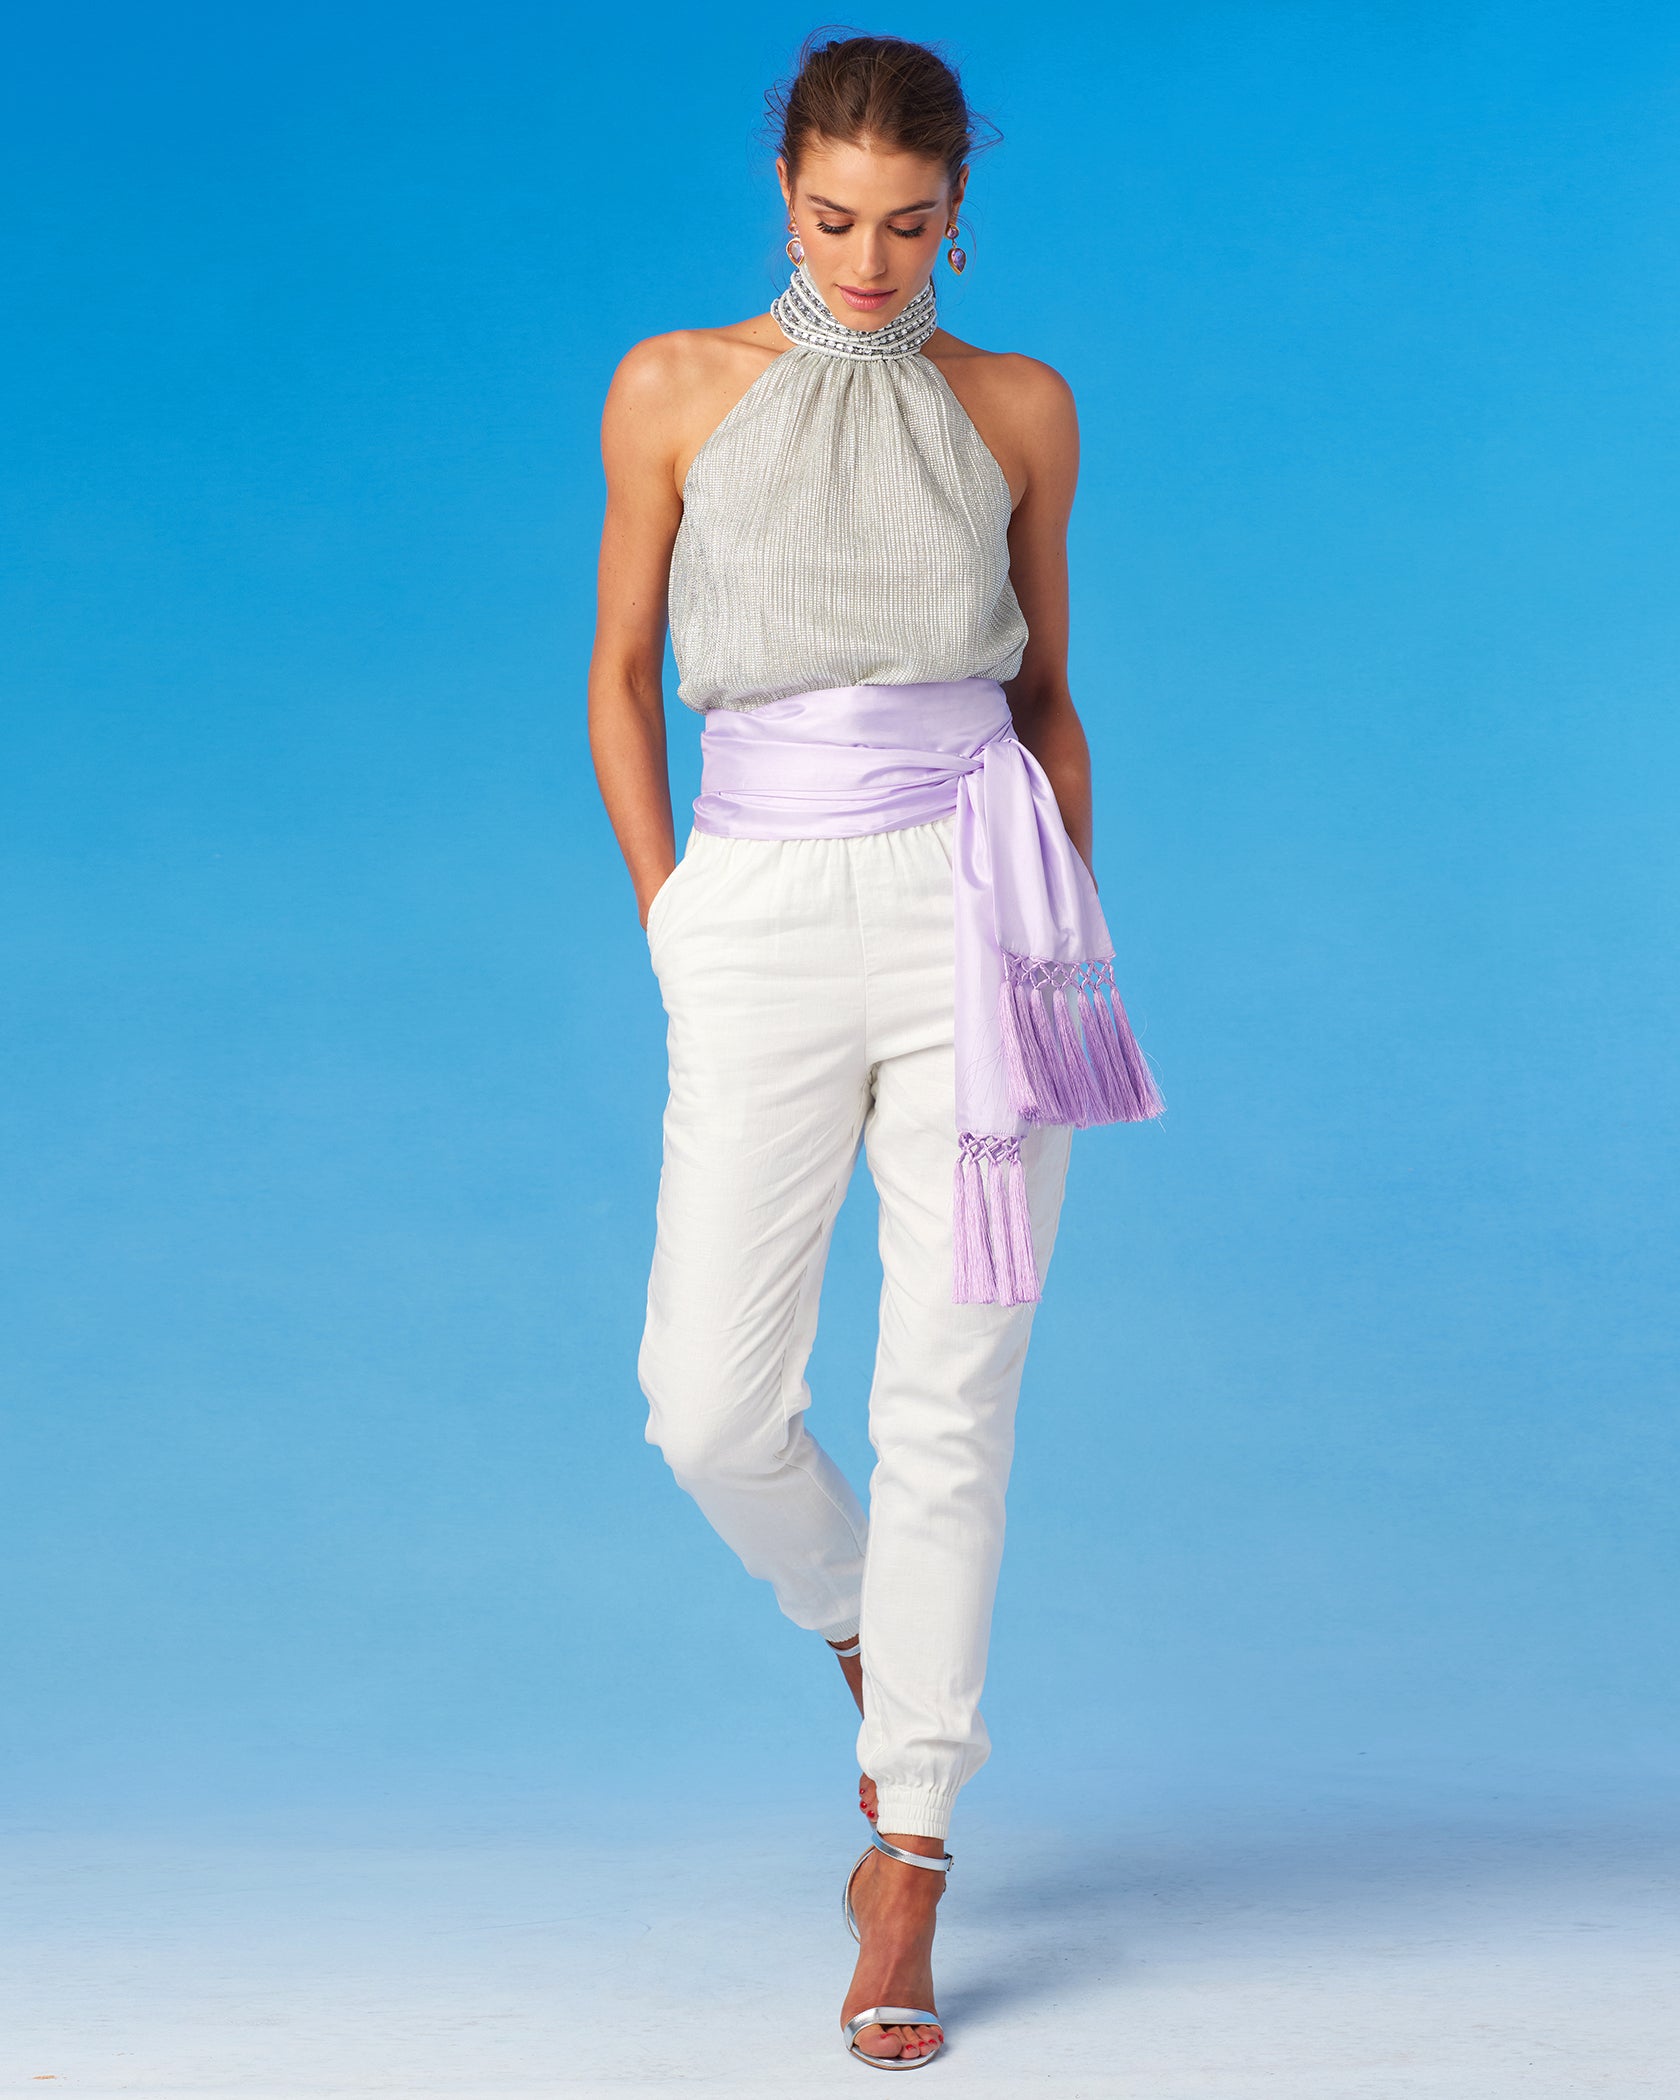 Odile Halter Top in Silver Cascade and Embellishment-Worn with White Linen Pant and Sash Belt